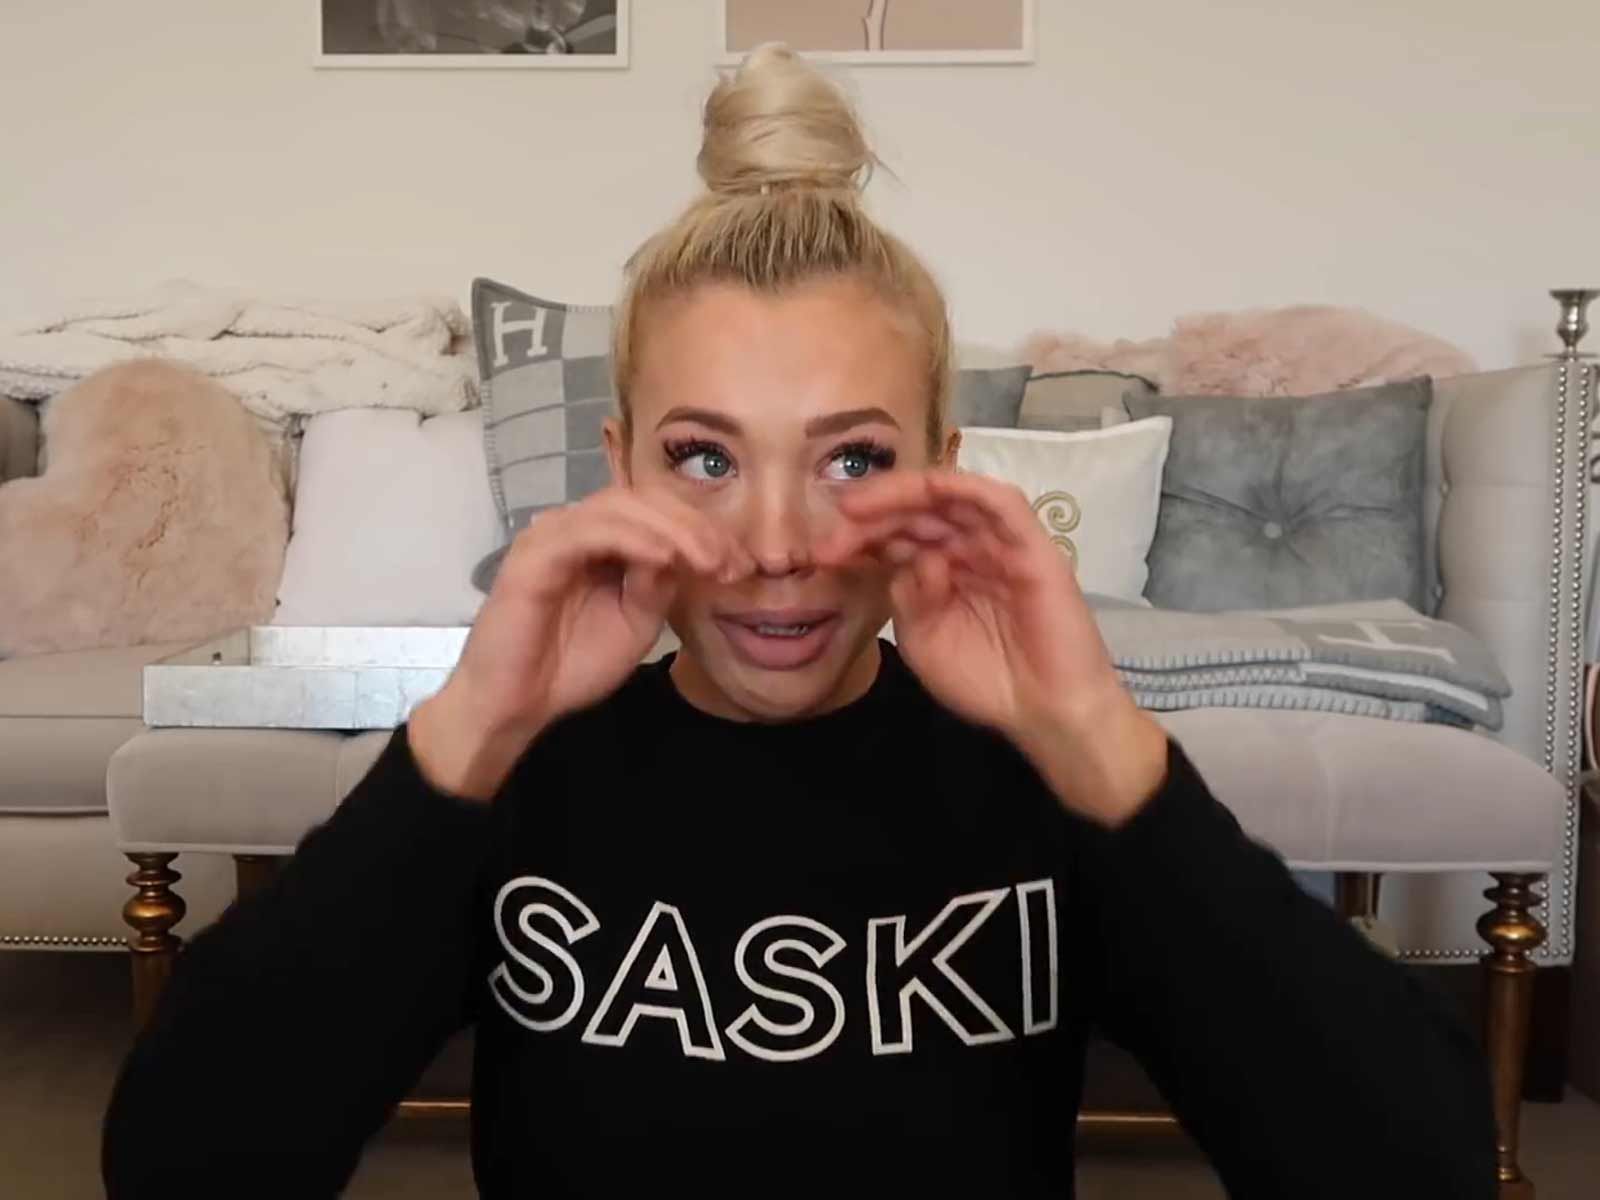 Instagram Model Tammy Hembrow Super Embarrassed After Collapsing At